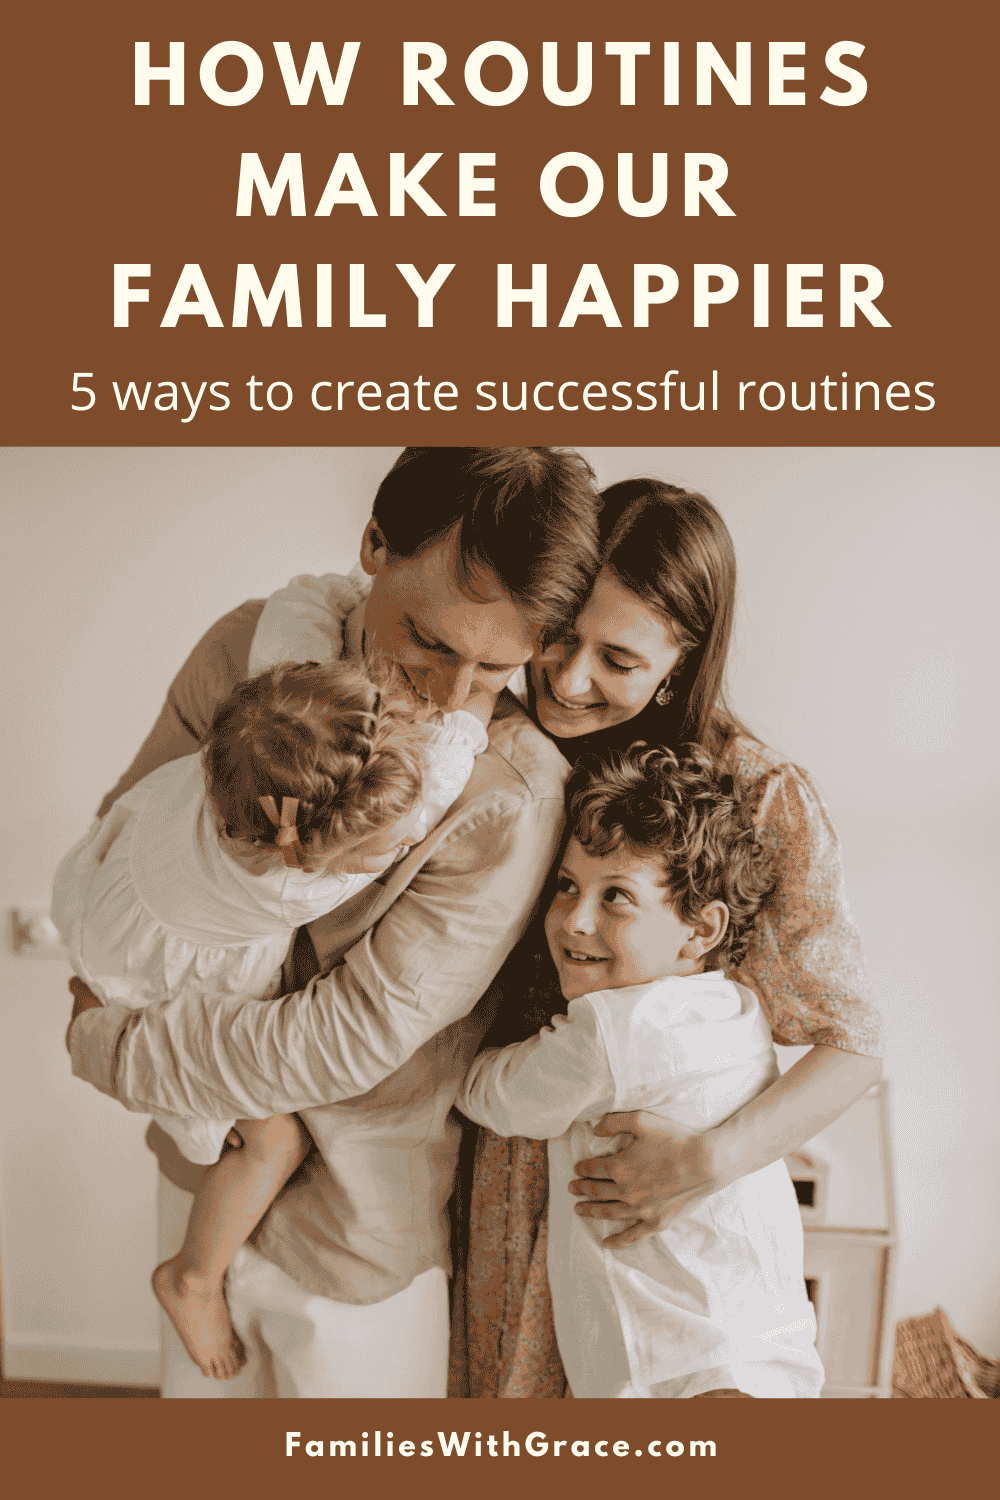 How routines make our family happier